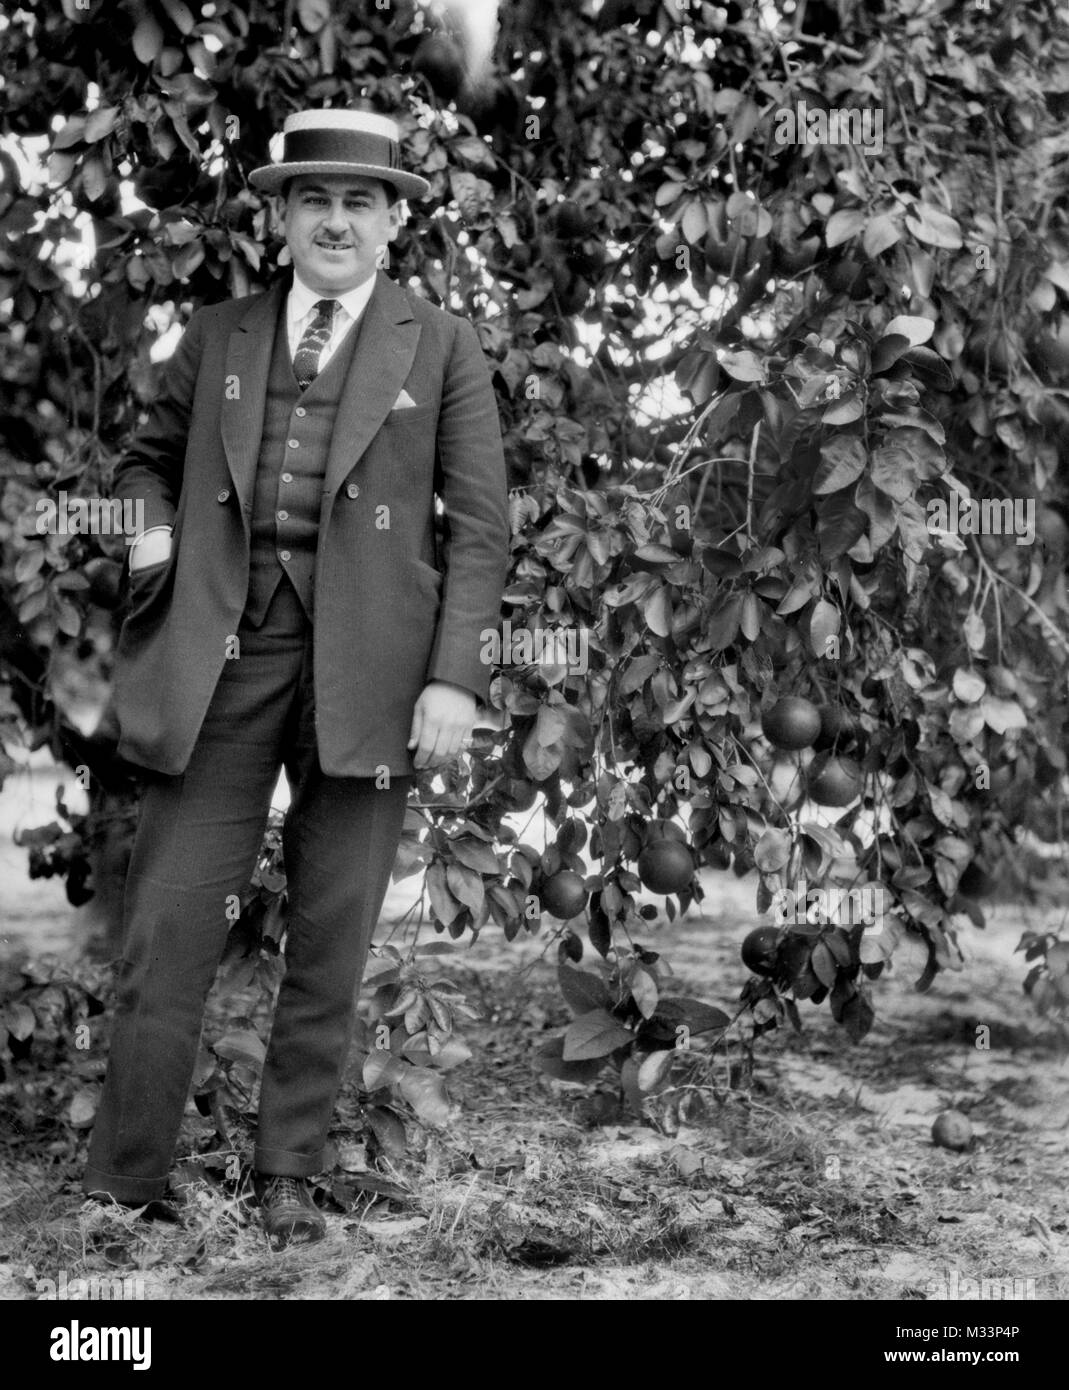 Man with a straw hat poses in a orange grove, ca. 1920. Stock Photo